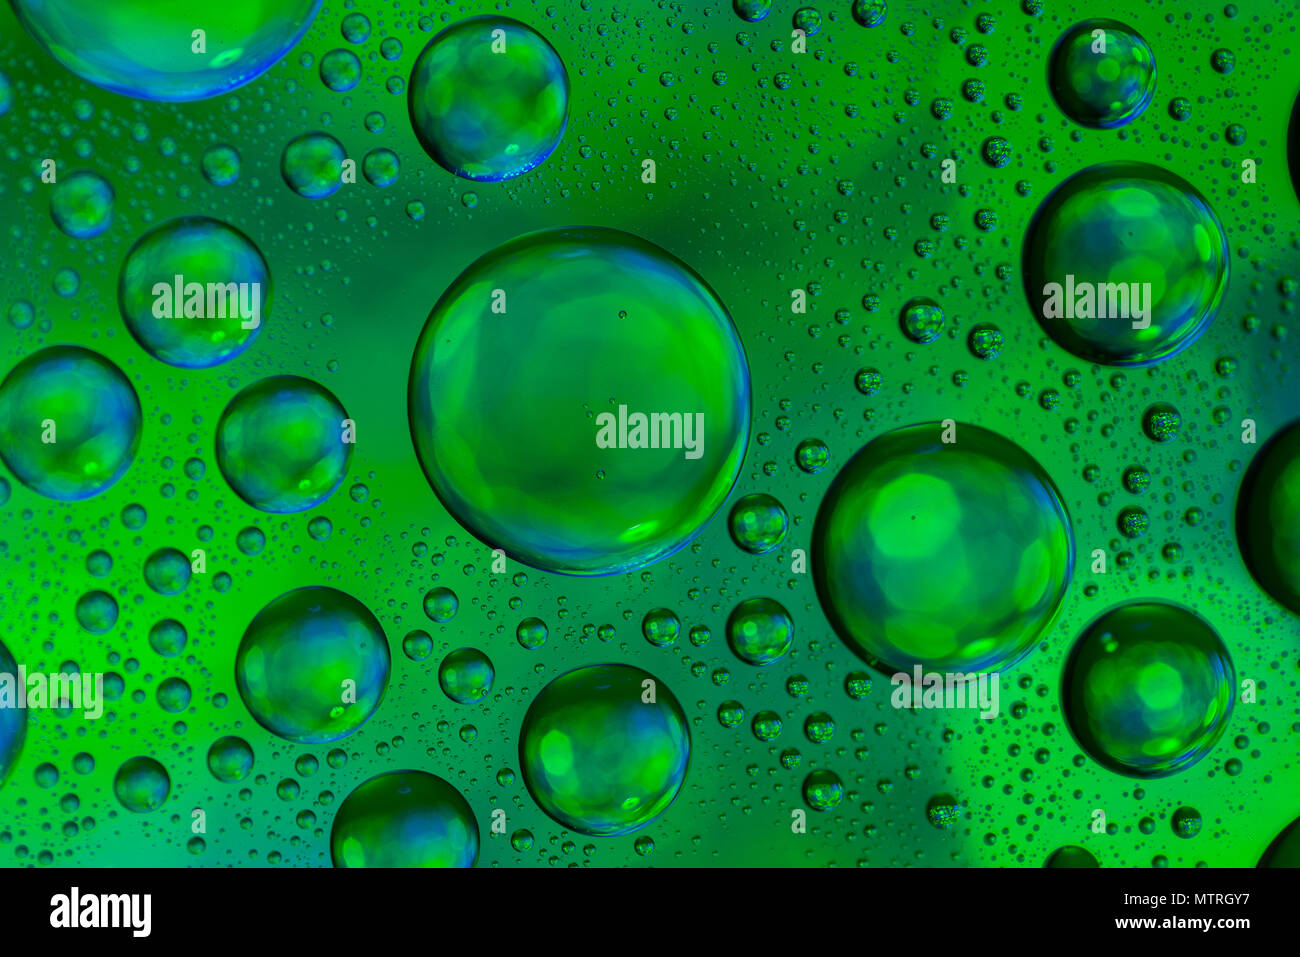 Water drops on glass with a green and blue lighted background. Stock Photo